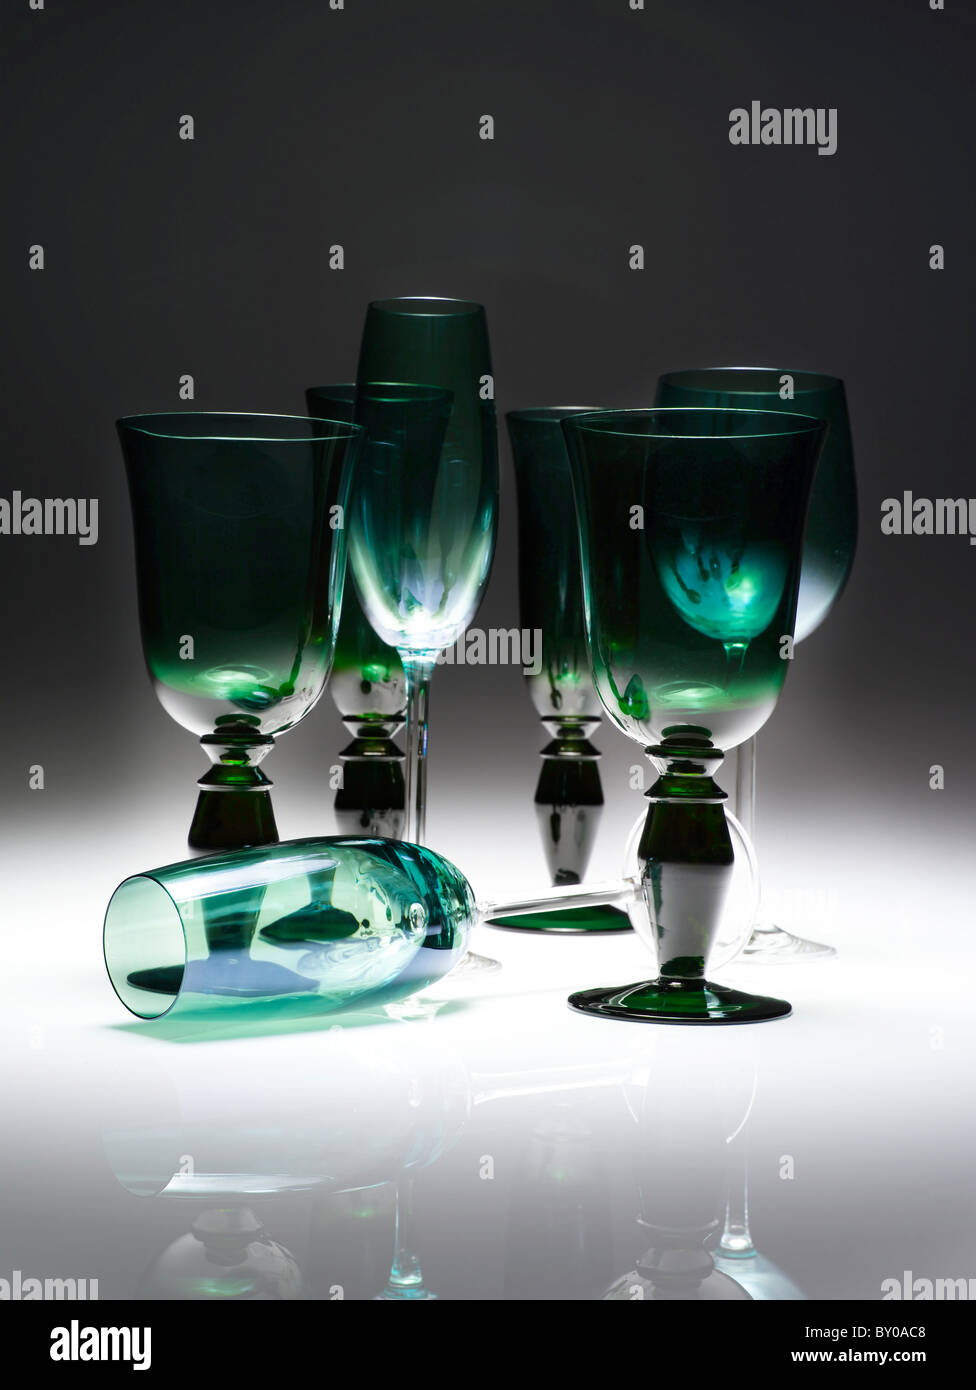 https://c8.alamy.com/comp/BY0AC8/set-of-green-coloredcoloured-wine-glasses-BY0AC8.jpg